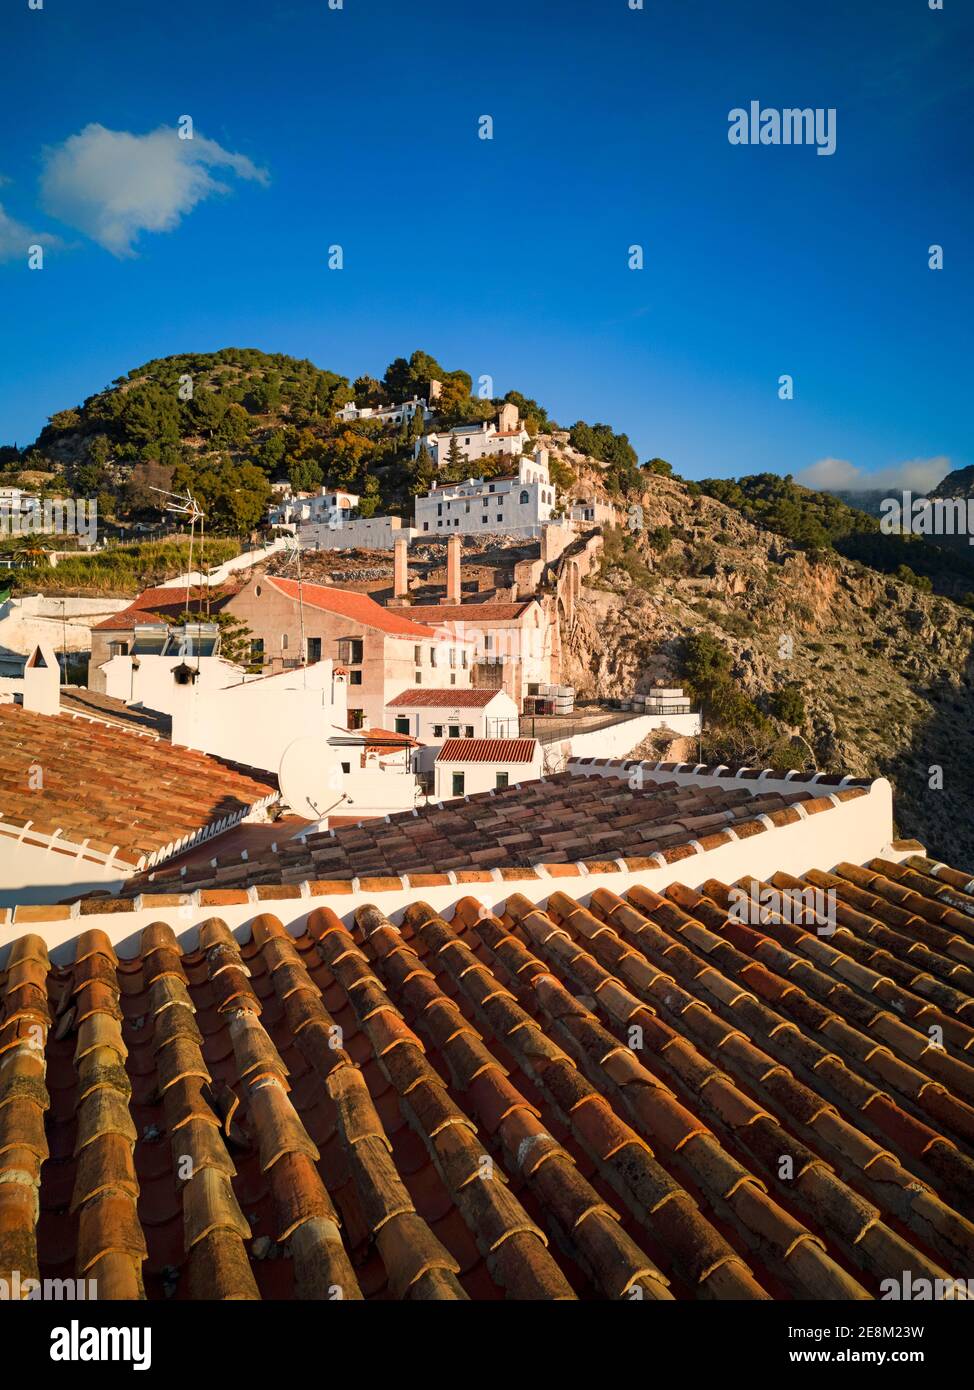 Sugar factory chimneys and rooftops above the Chillar Valley in the Sierra de Tejeda, behind Frigiliana in the province of Malaga, Andalusia, Spain. Stock Photo